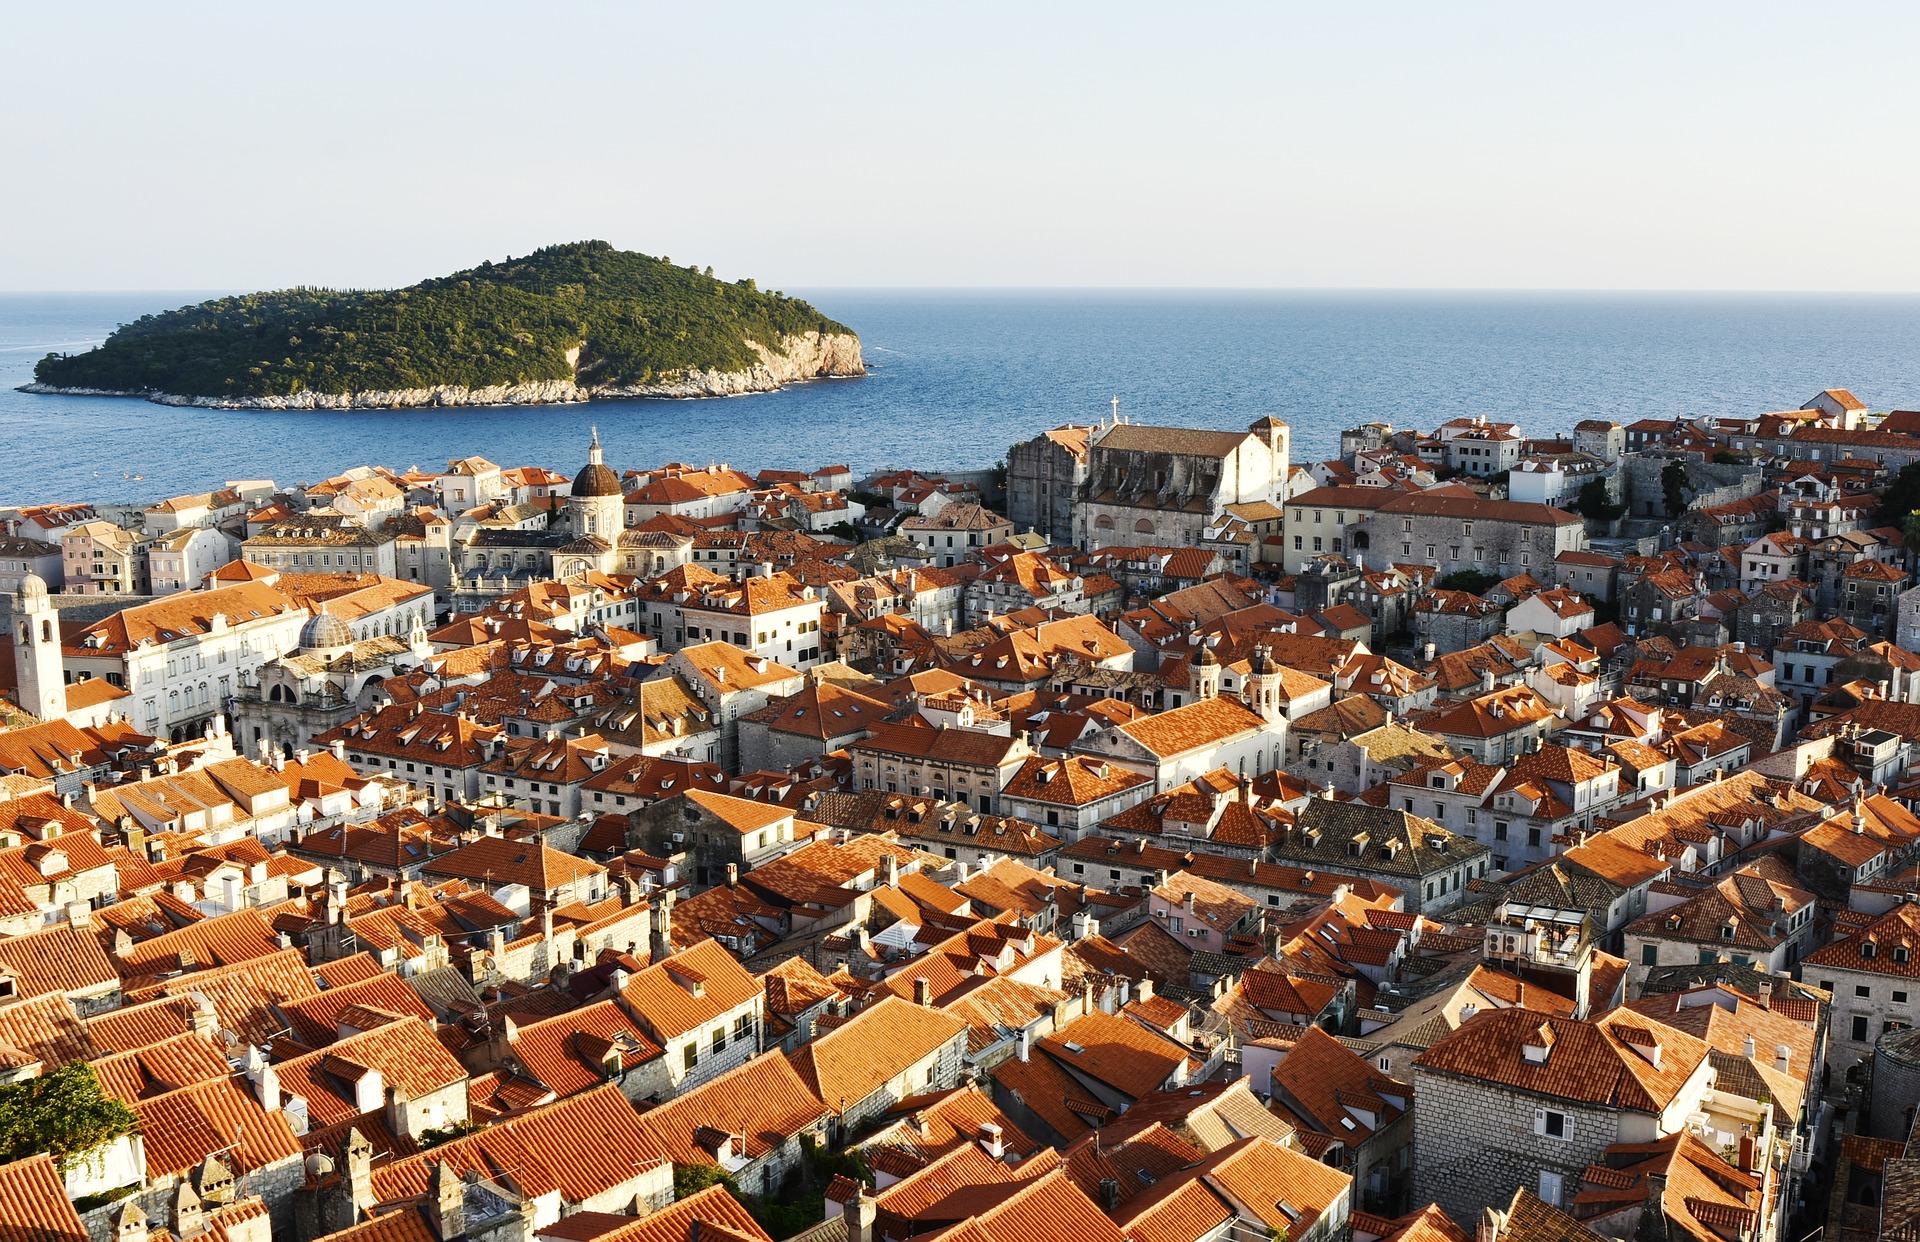 Tour of Dubrovnik with a visit to Franciscan Monastery